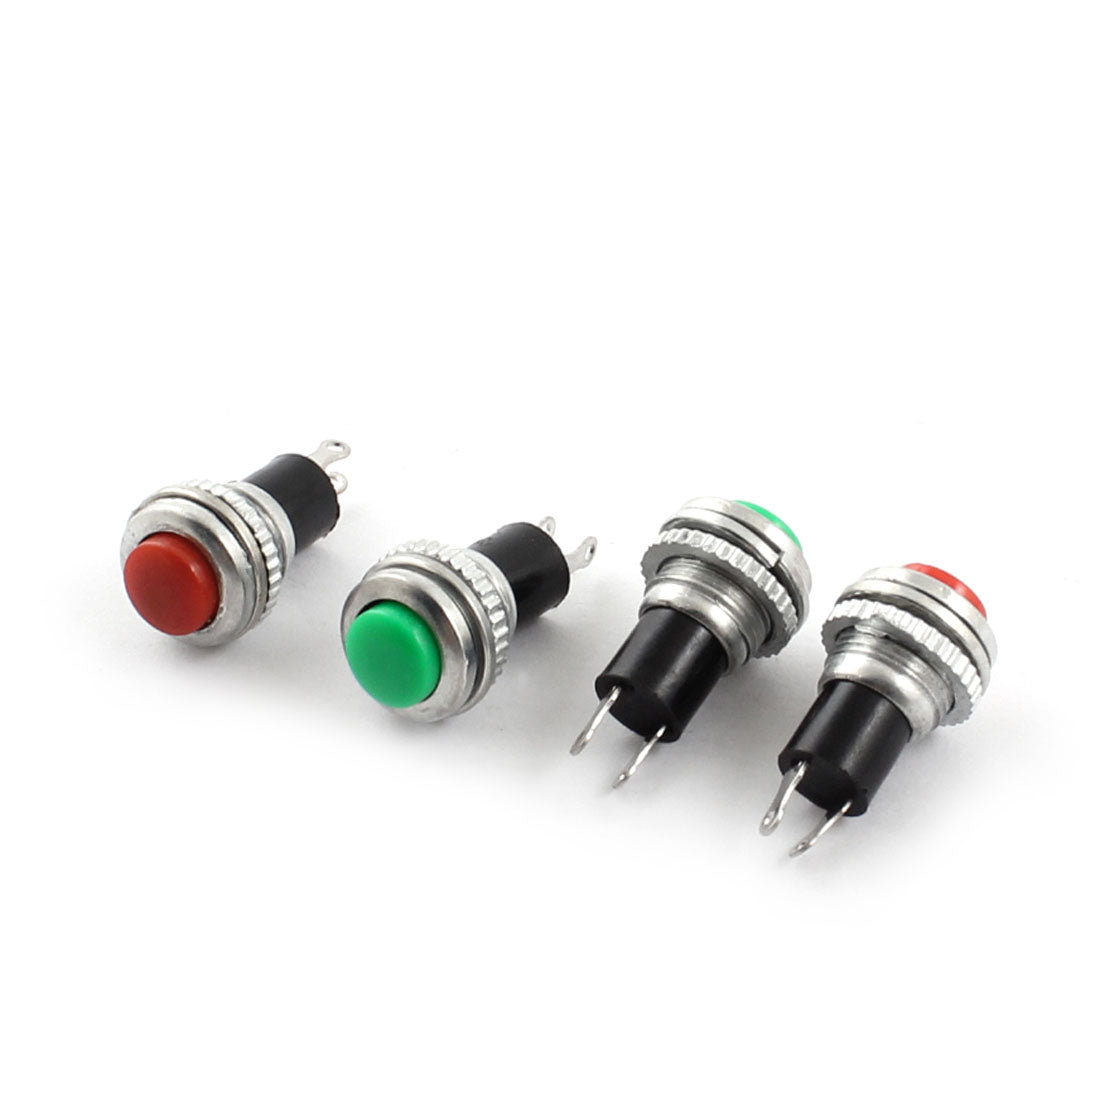 uxcell Uxcell 4 Pcs AC 0.5A 125V 2 Pin Red Green Button 10mm Thread Panel Mounting SPST Non Locking Metal Push Button Switch